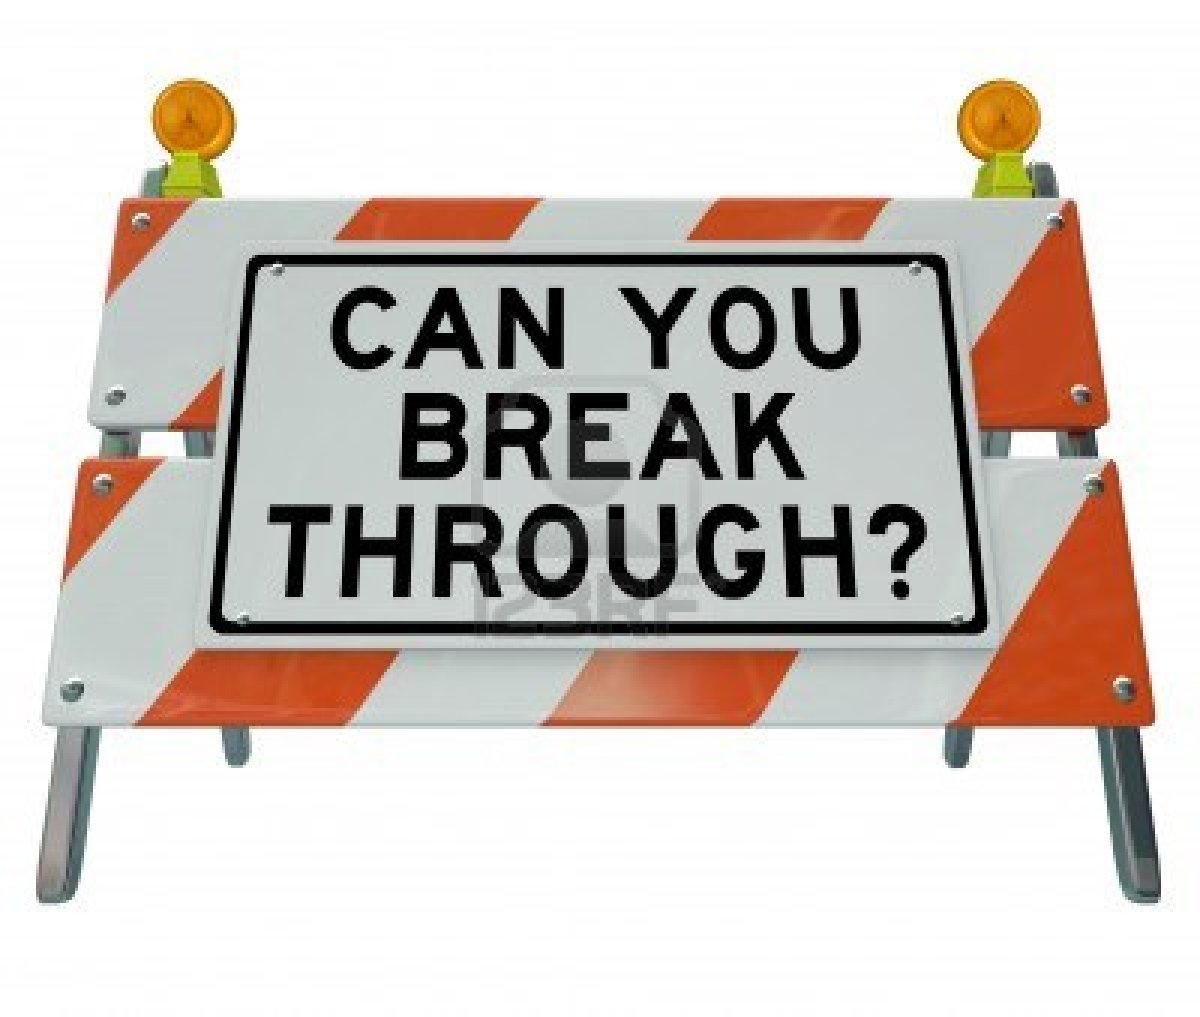 Orange and white striped construction sign with Can You Break Through printed on an attached sign